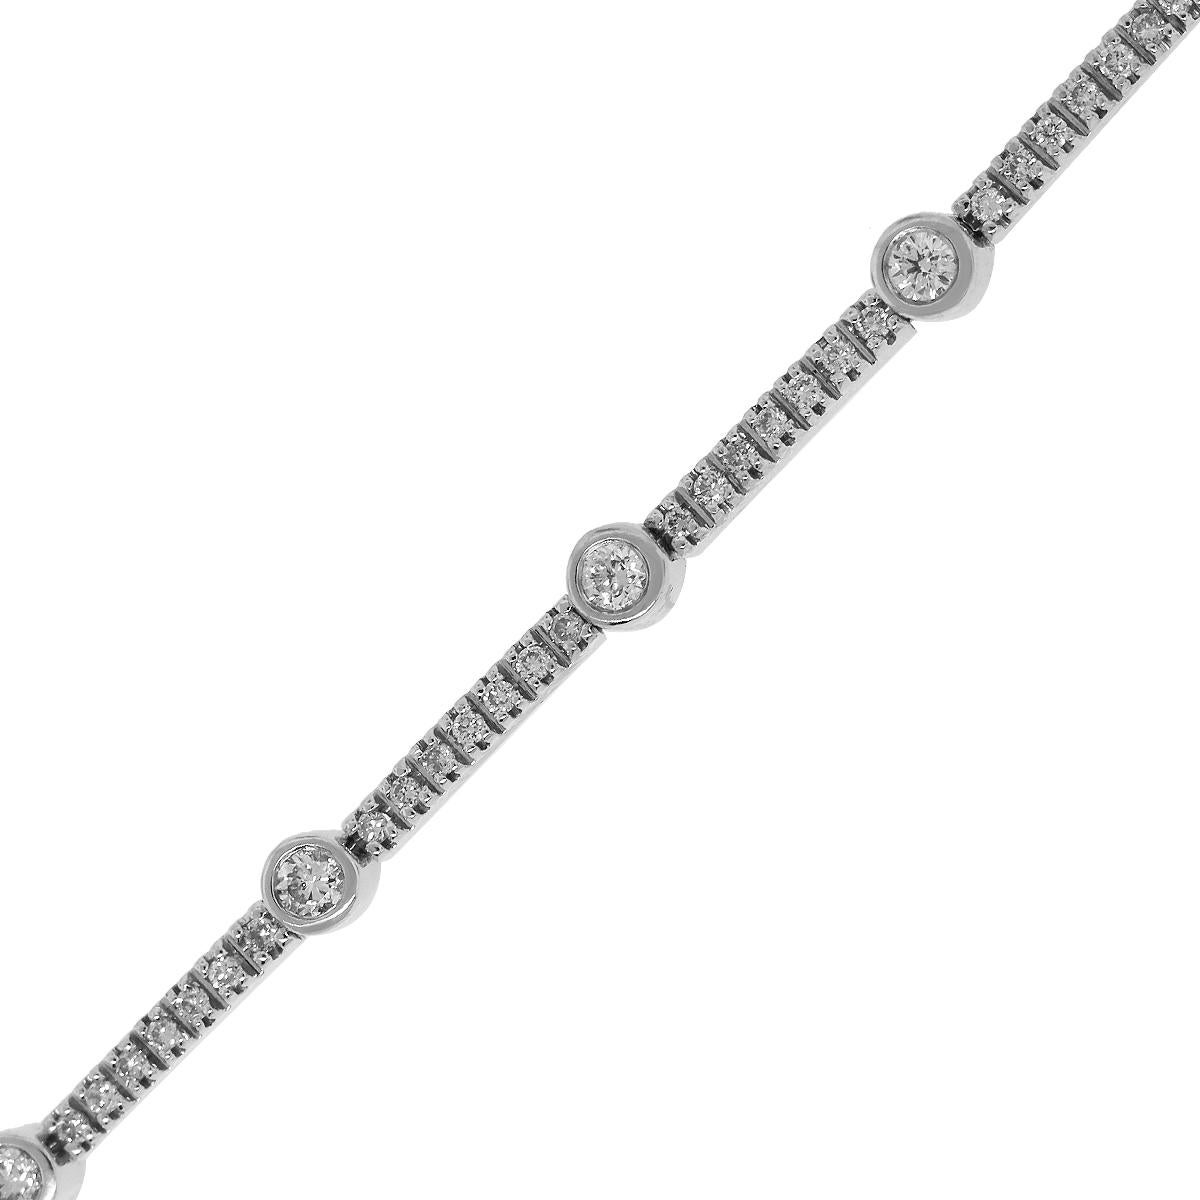 Material: 18k White Gold
Diamond Details: Approximately 1.65ctw round brilliant bezel set diamonds. Diamonds are G/H in color and VS in clarity.
Measurements: 7.5″
Clasp: Tongue in box clasp with safety latch
Total Weight: 16.10g (10.3dwt)
SKU: